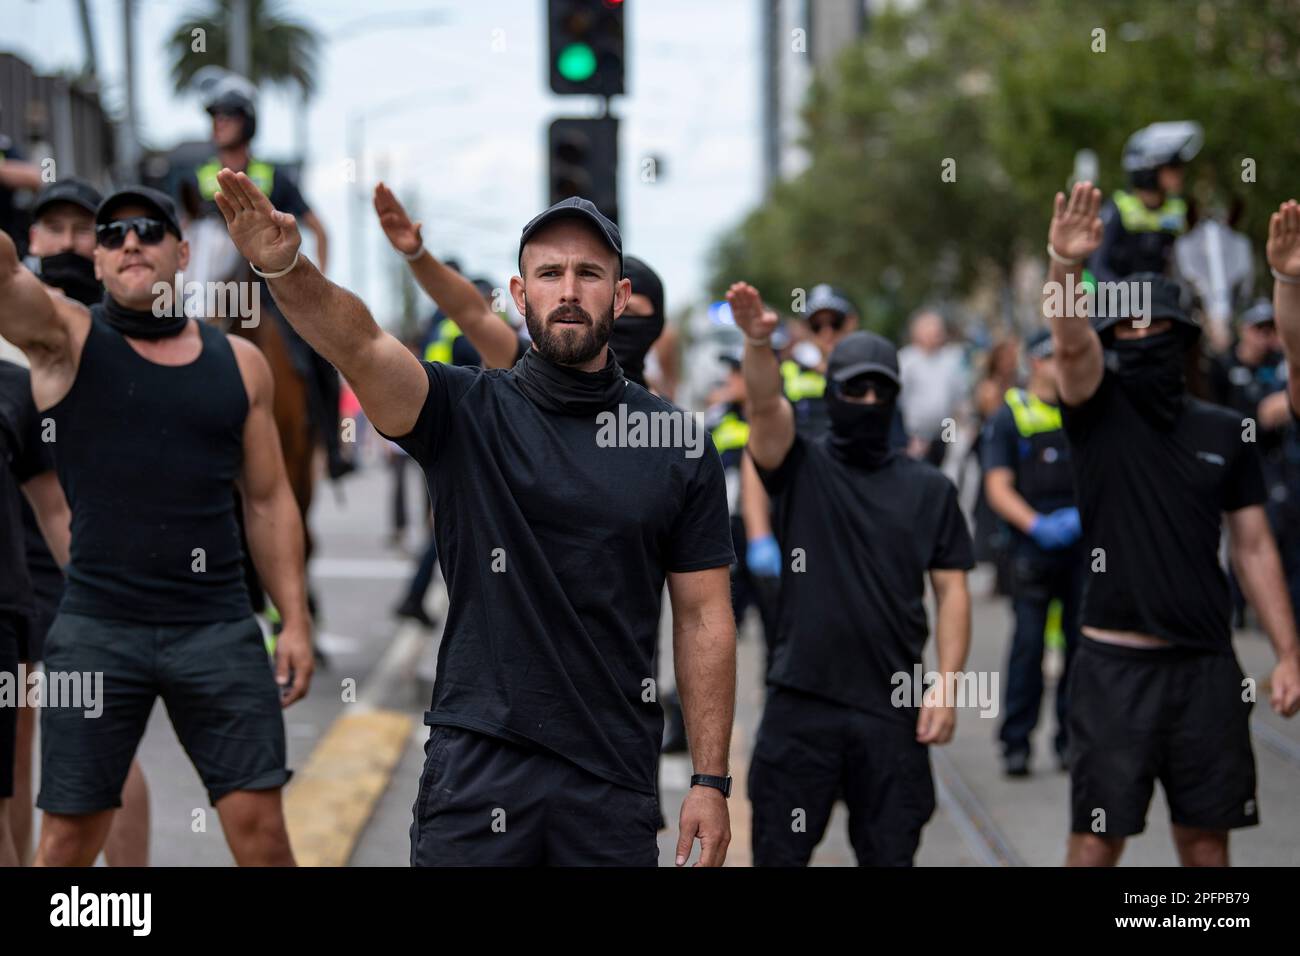 Melbourne, Australia, March 18th 2023. Thomas Sewell and fellow neo-nazis saluting at counter-protesters at a Trans Exclusionary Radical Feminist (TERF) rally, where feminists discredit diverse gender identities, specifically transgender women. Credit: Jay Kogler/Alamy Live News Stock Photo